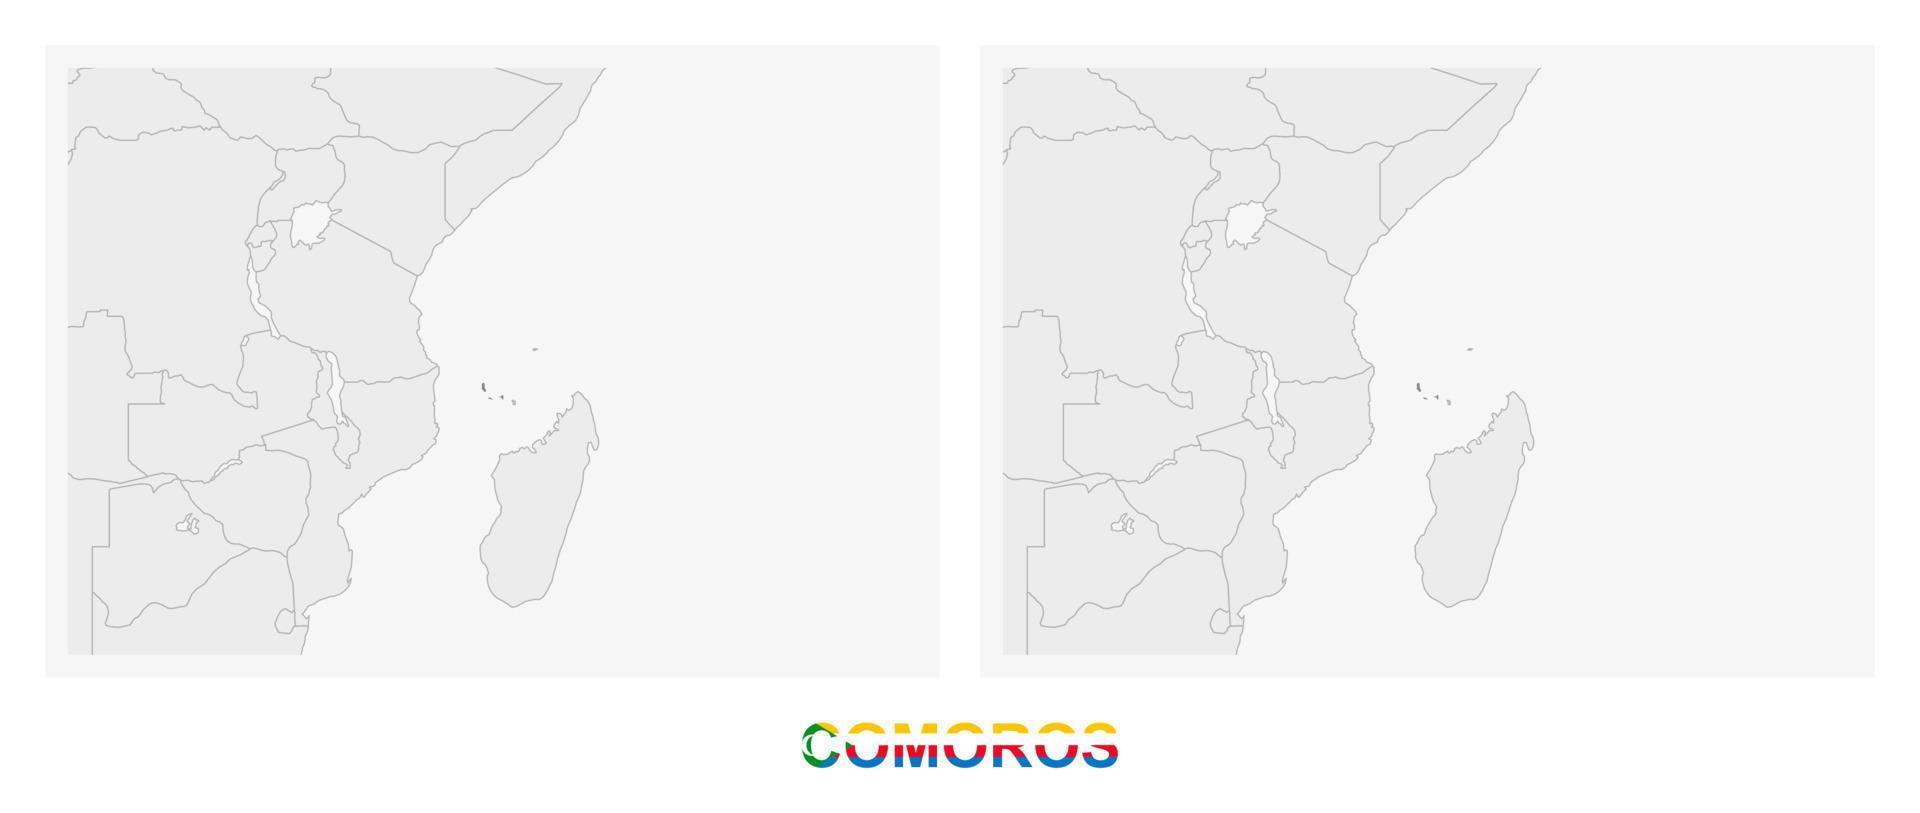 Two versions of the map of Comoros, with the flag of Comoros and highlighted in dark grey. vector